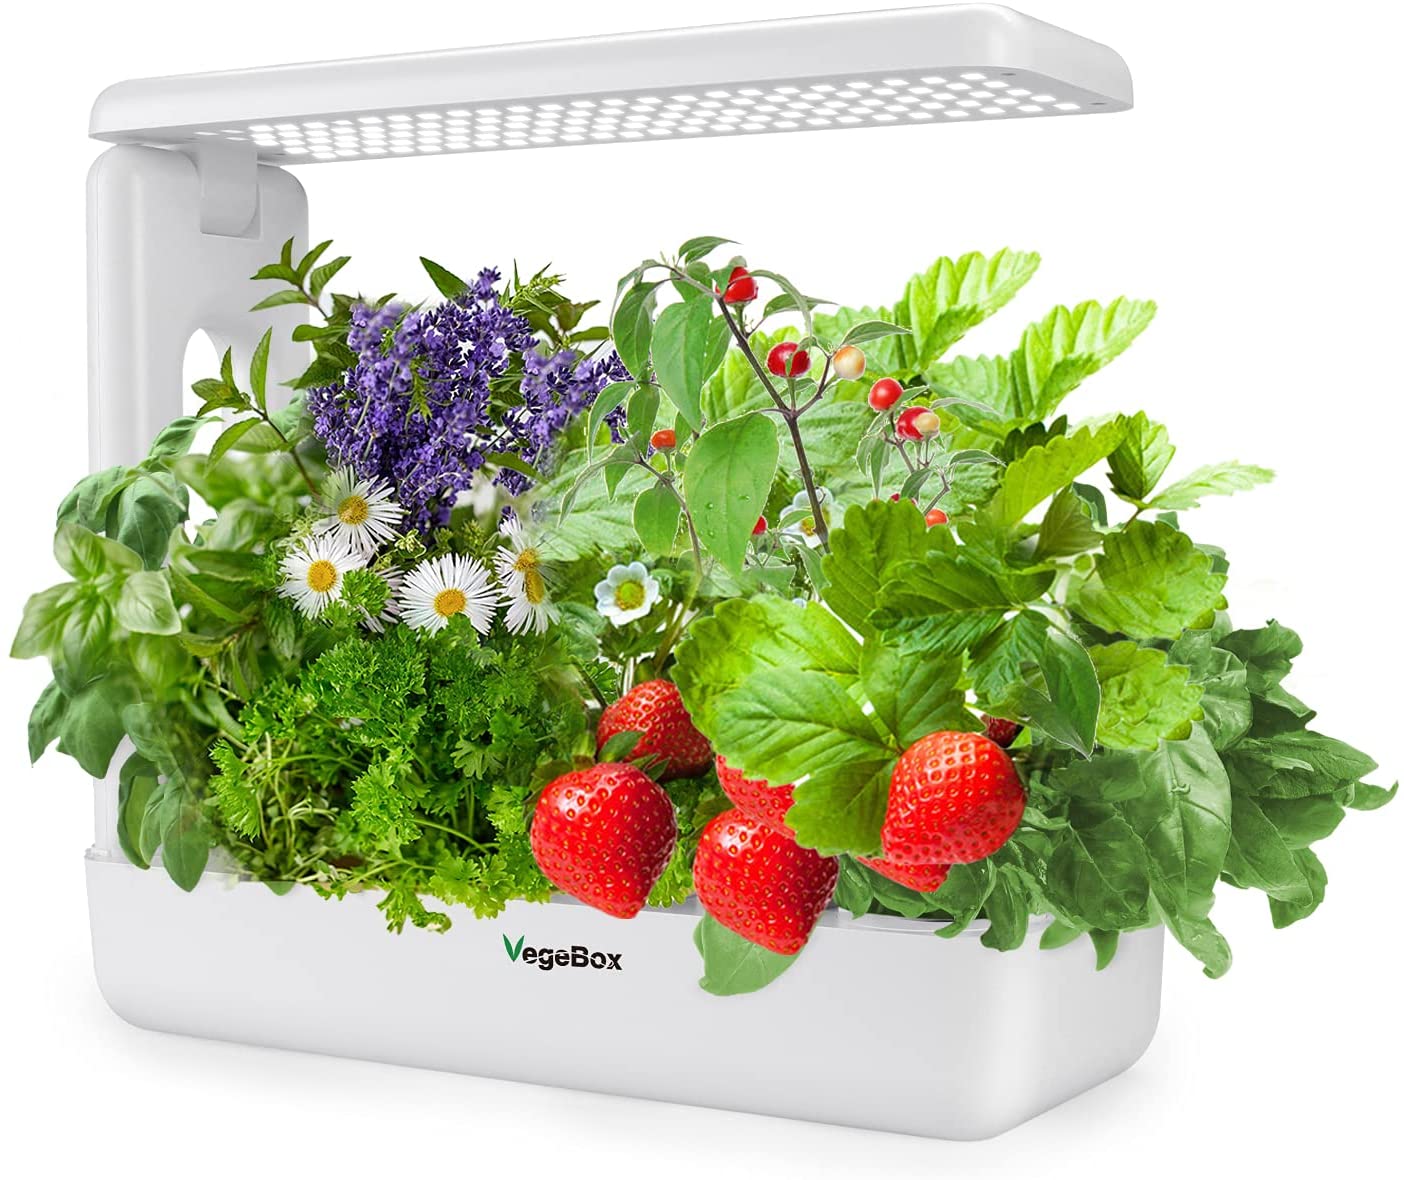 VegeBox Large Indoor Hydroponic Growing System, White